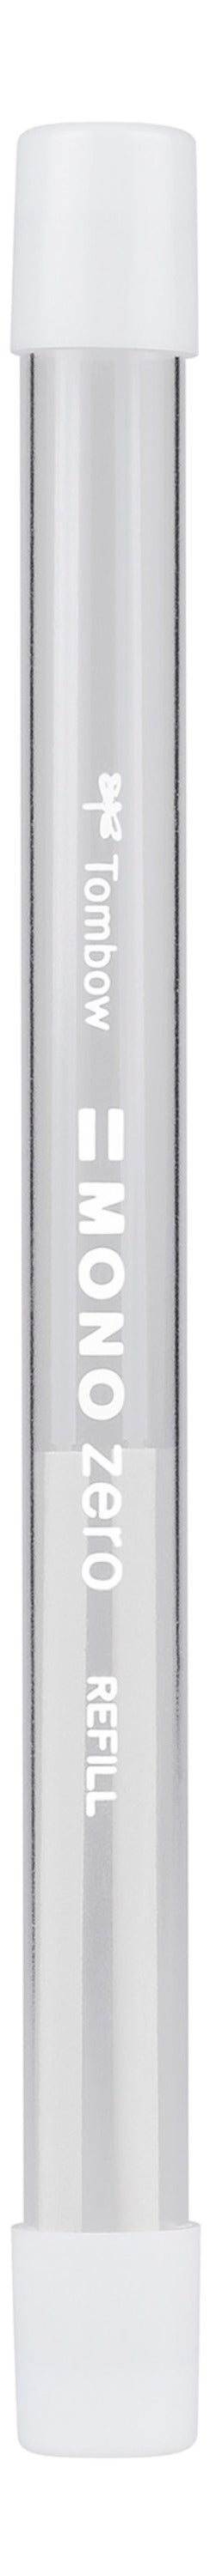 Tombow MONO Zero Refill for Round Tip Eraser White - ER-KUR - NWT FM SOLUTIONS - YOUR CATERING WHOLESALER